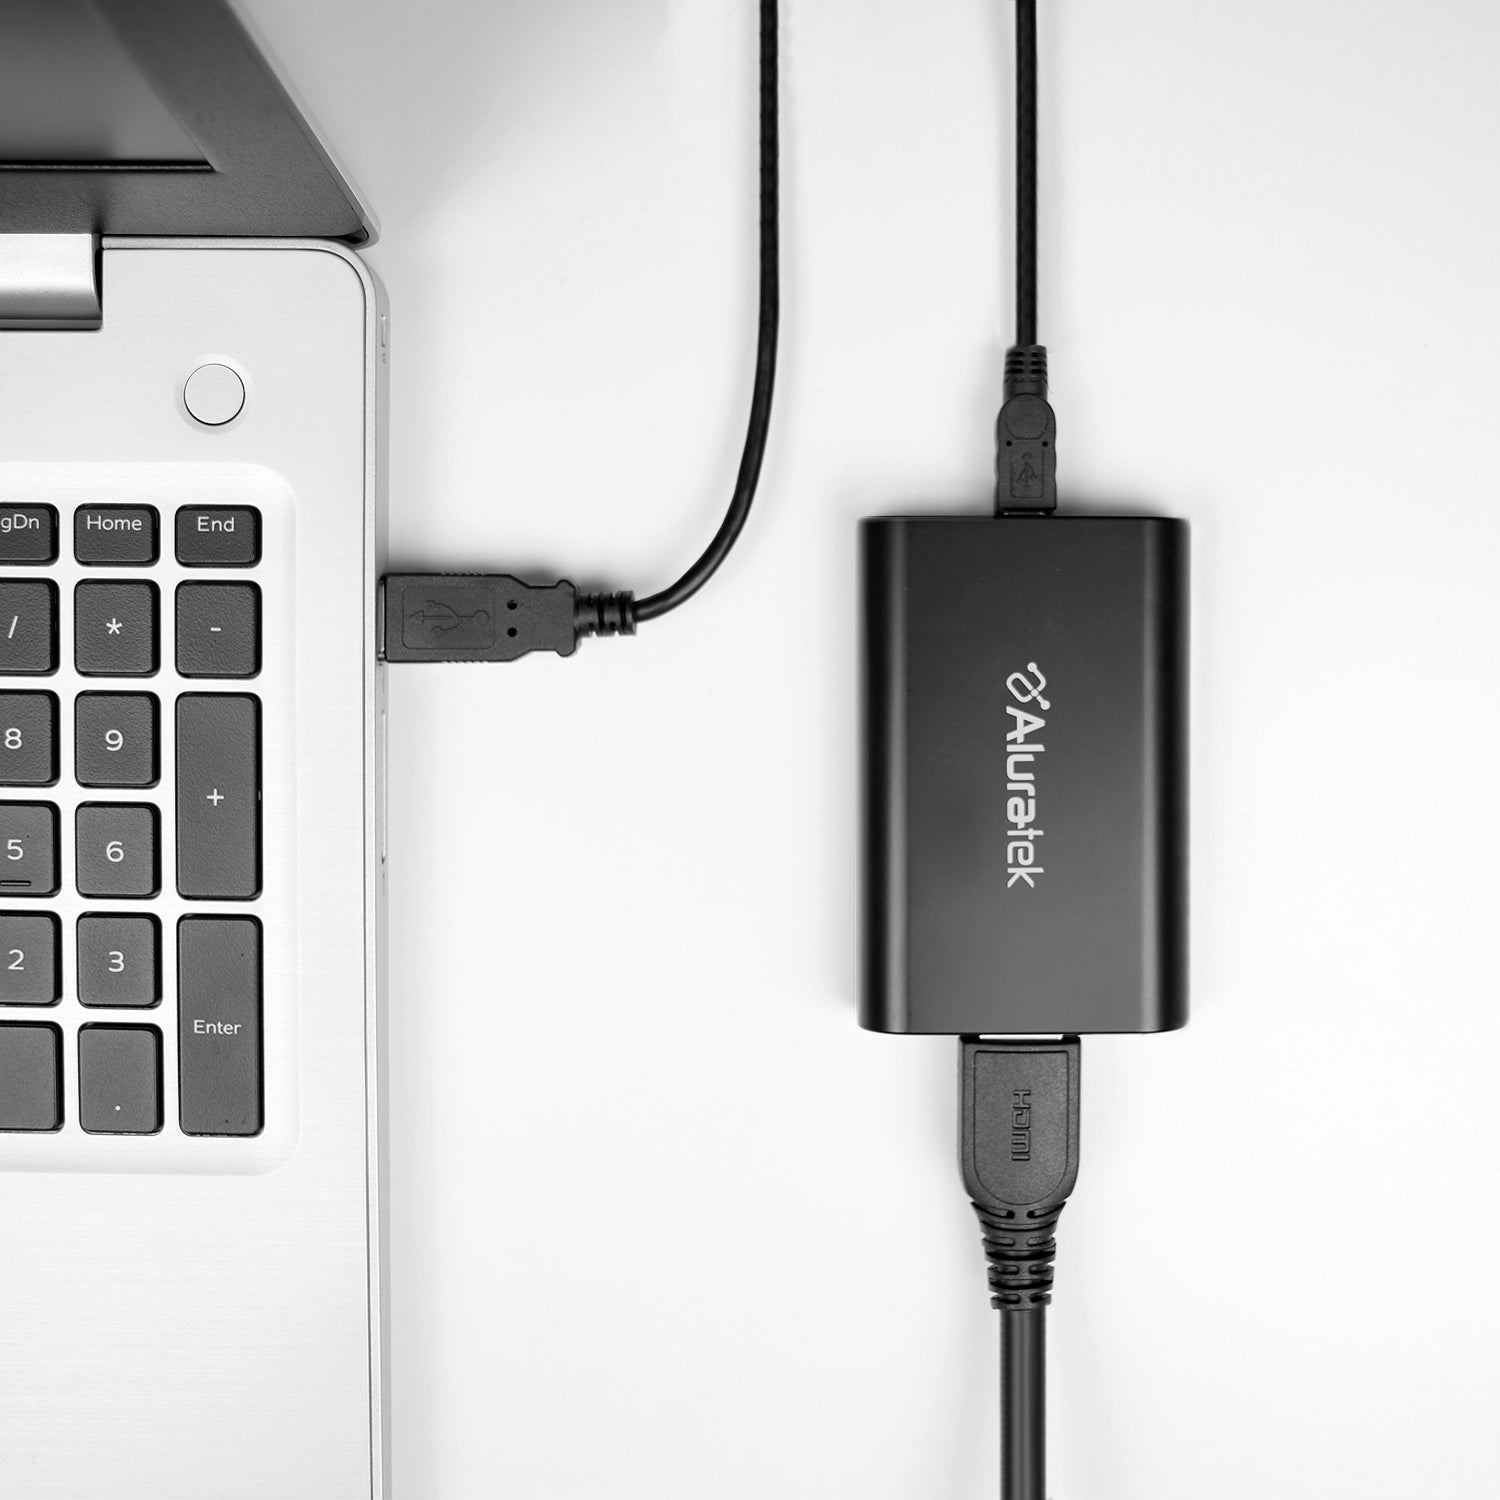 USB HDMI Adapter with Audio